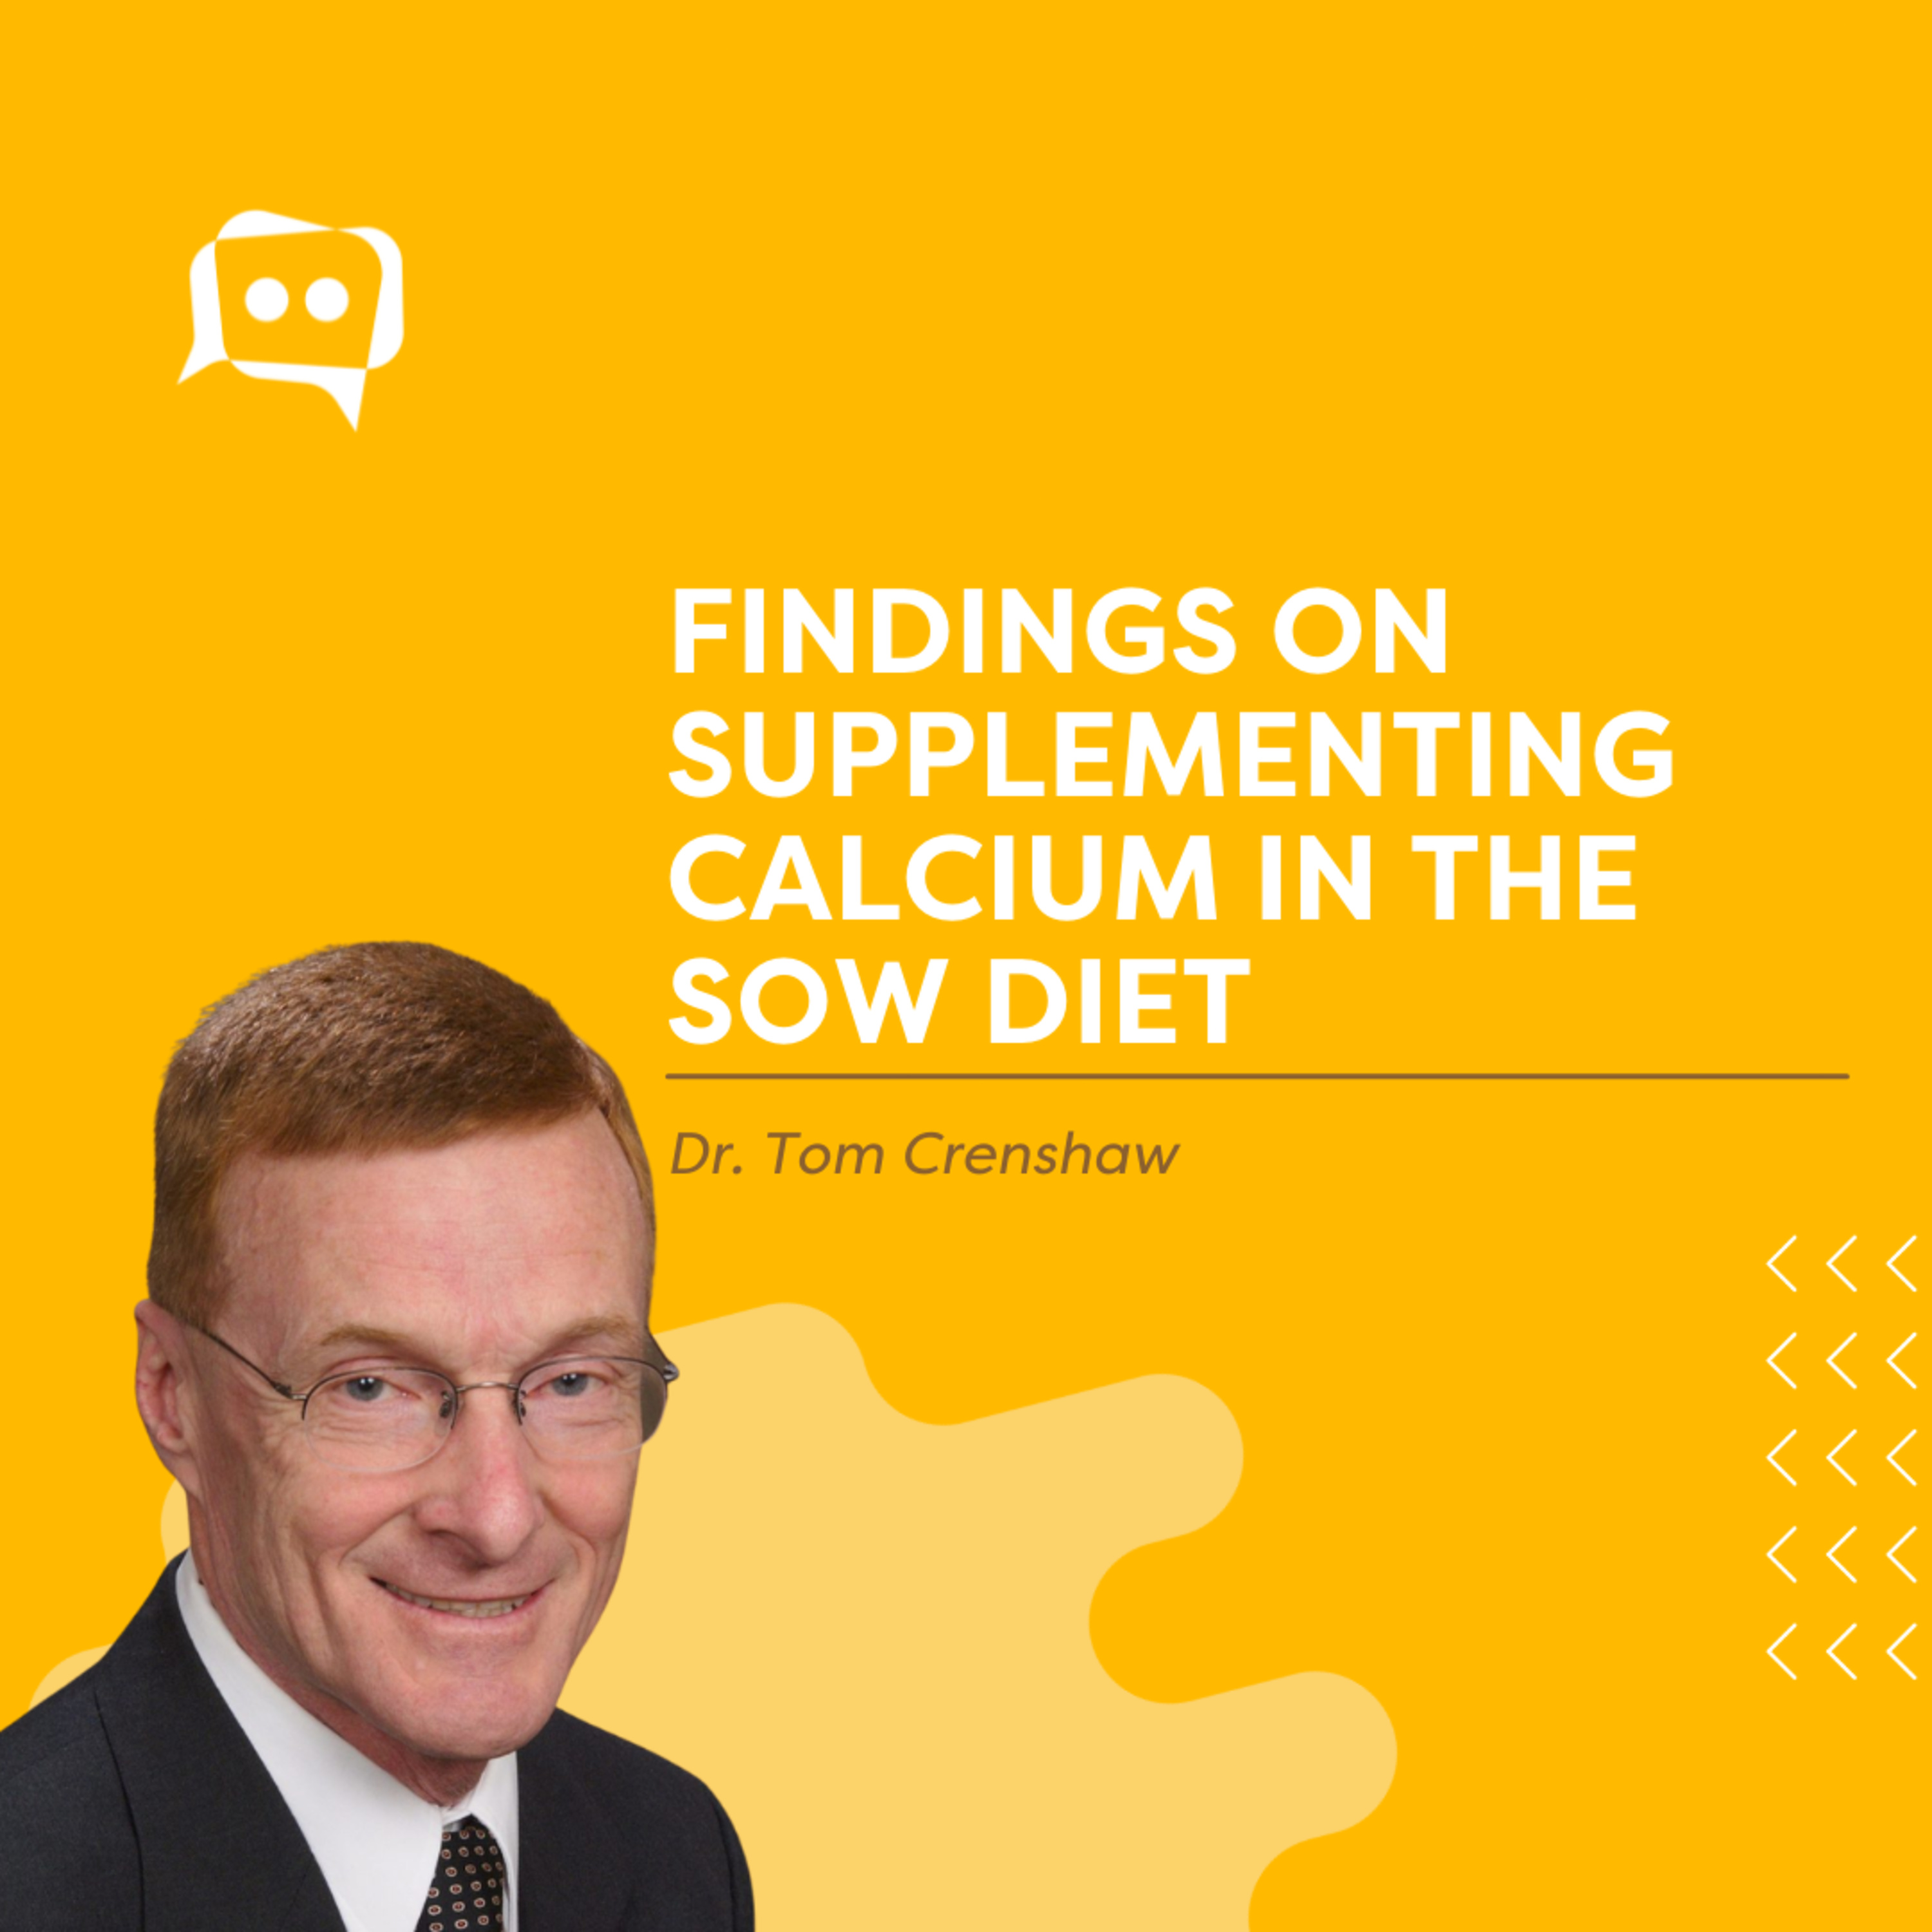 #SHORTS: Findings on supplementing calcium in the sow diet, with Dr. Tom Crenshaw